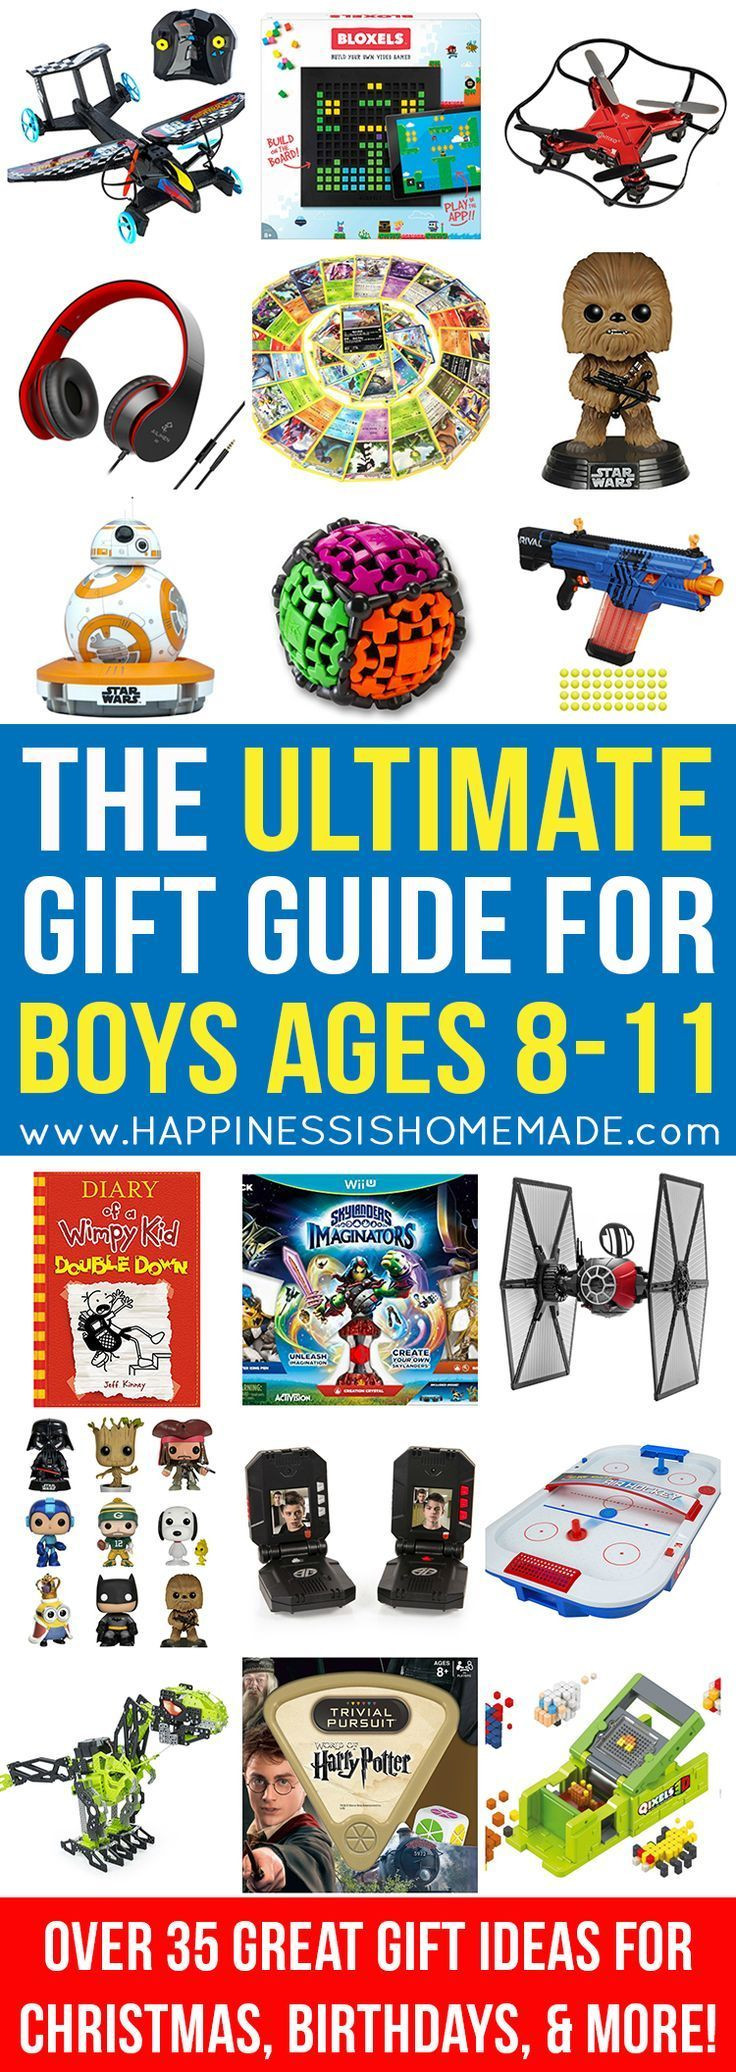 Gift Ideas For Boys Age 10
 The Best Gift Ideas for Boys Ages 8 11 Looking for t